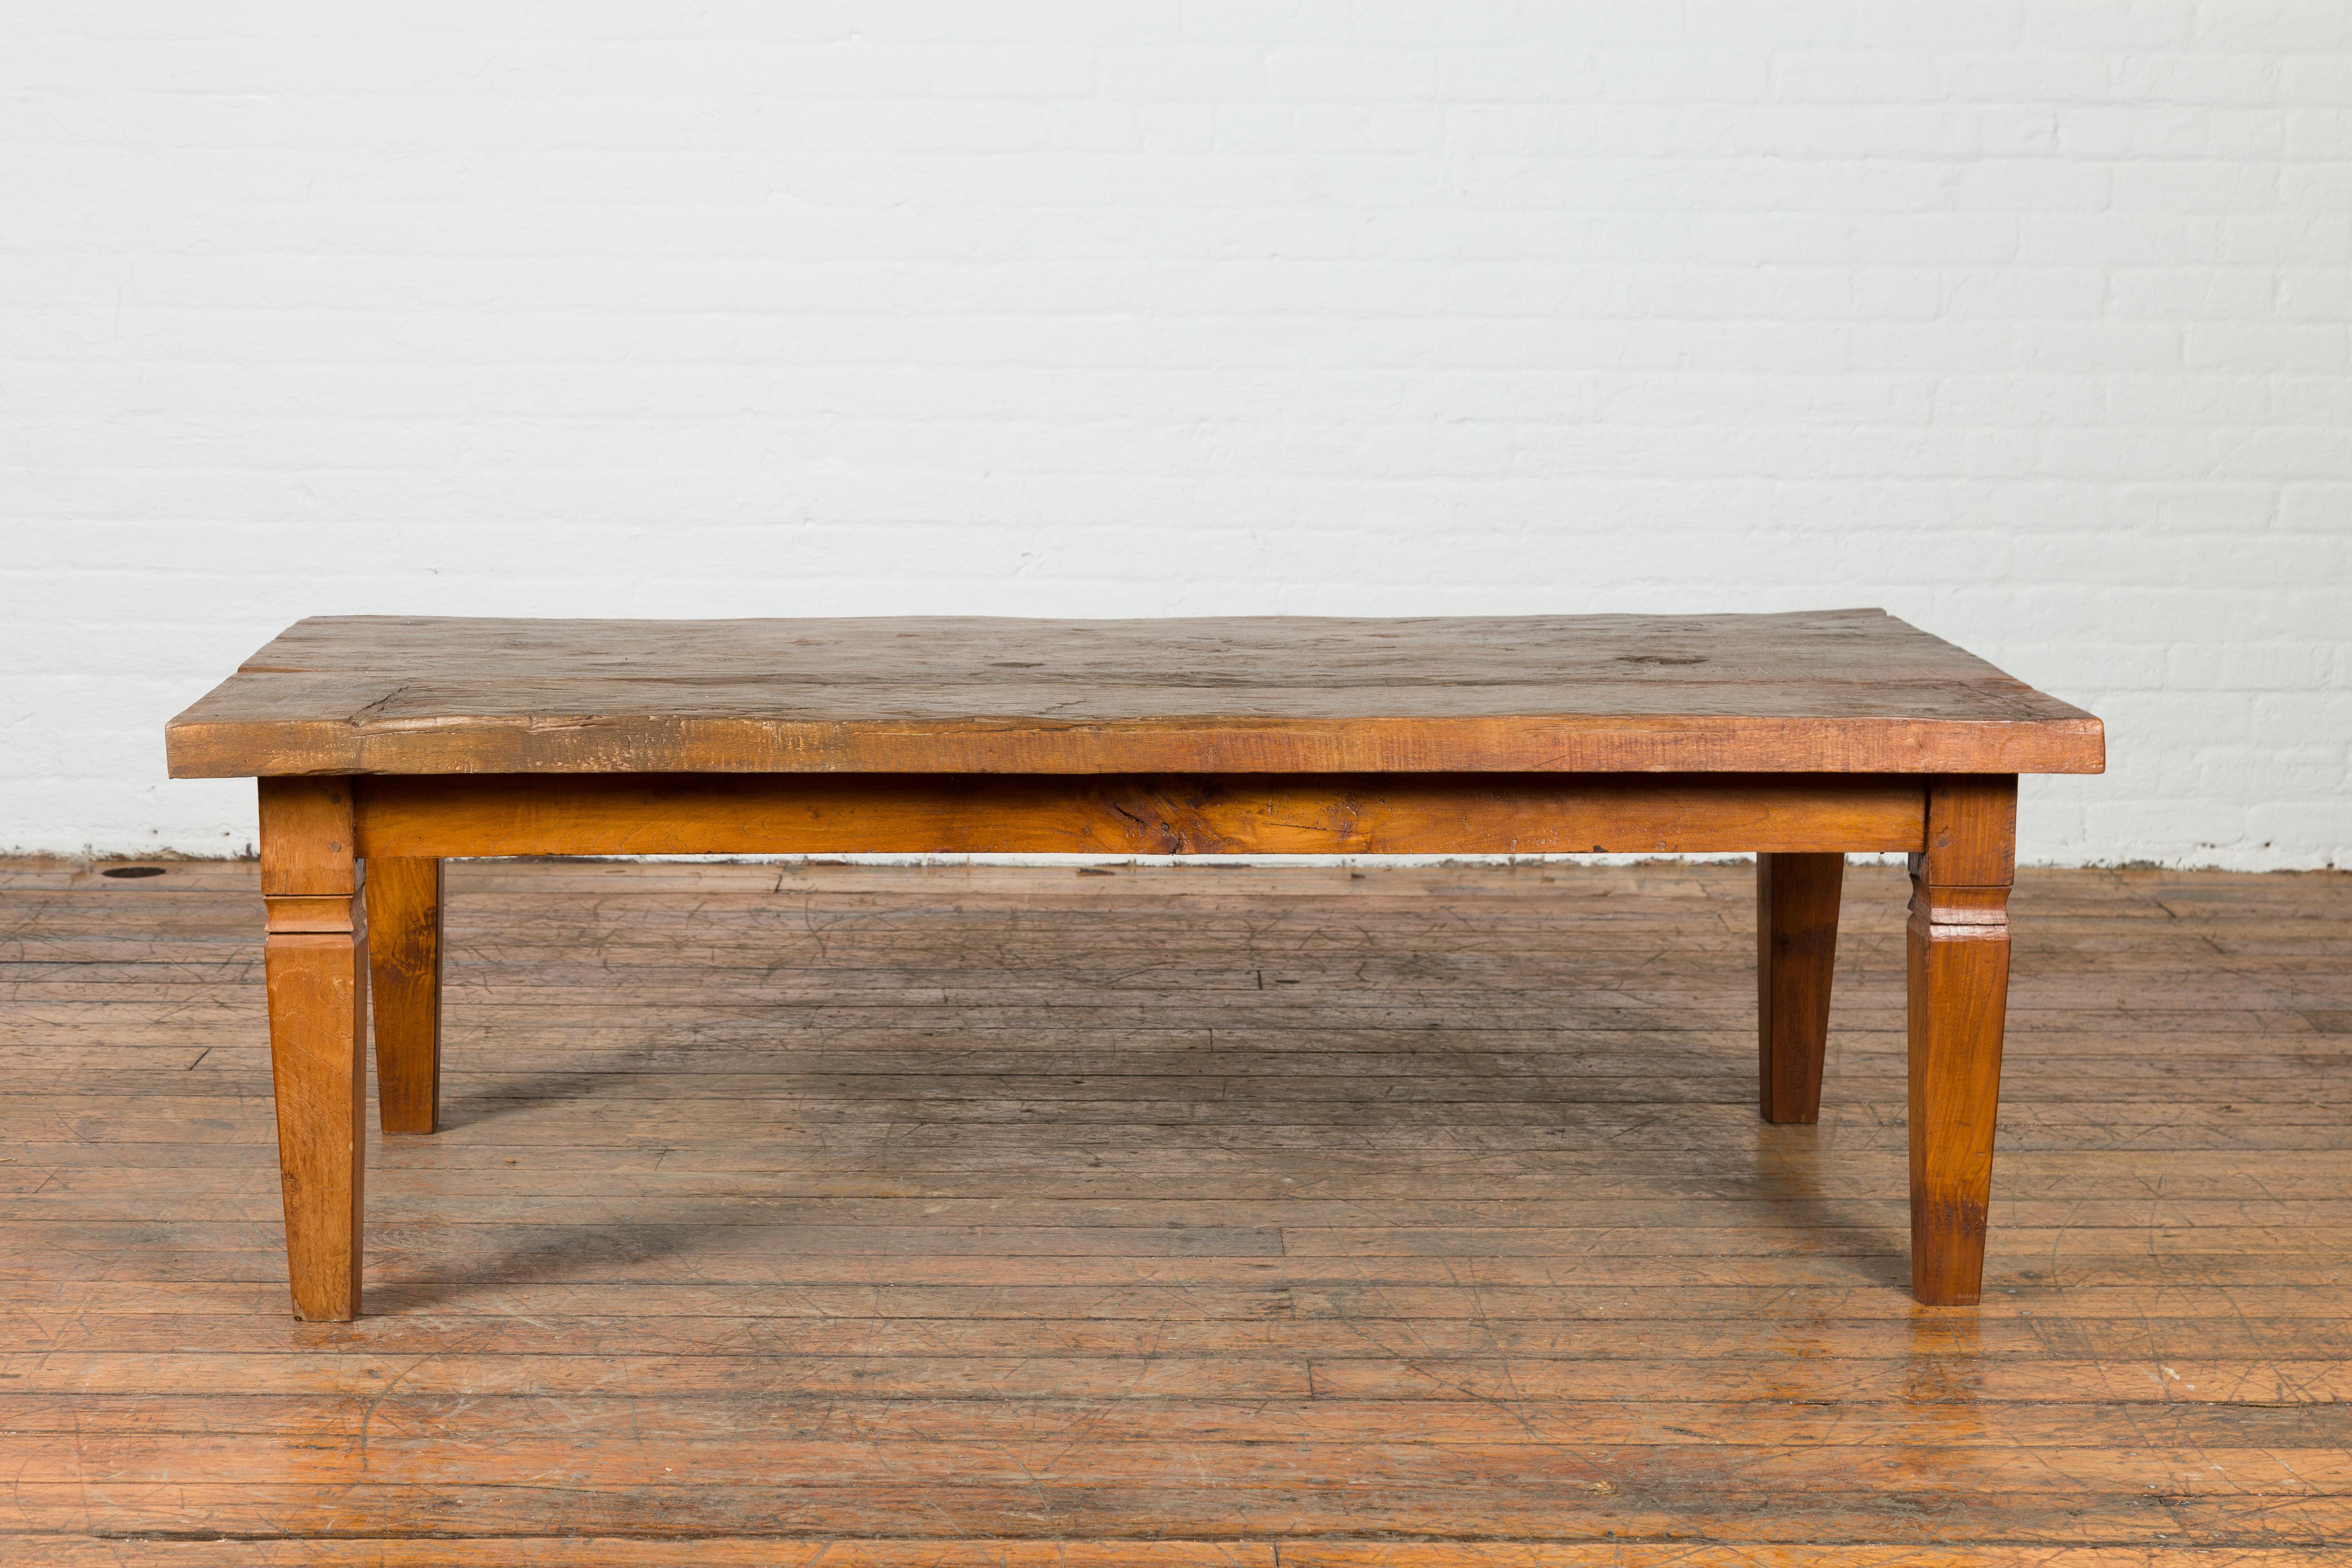 A rustic Indonesian antique wooden coffee table from the 19th century, made from a slab of wood. Created in Indonesia during the 19th century, this coffee table draws our attention with its rustic planked top with nicely weathered appearance,